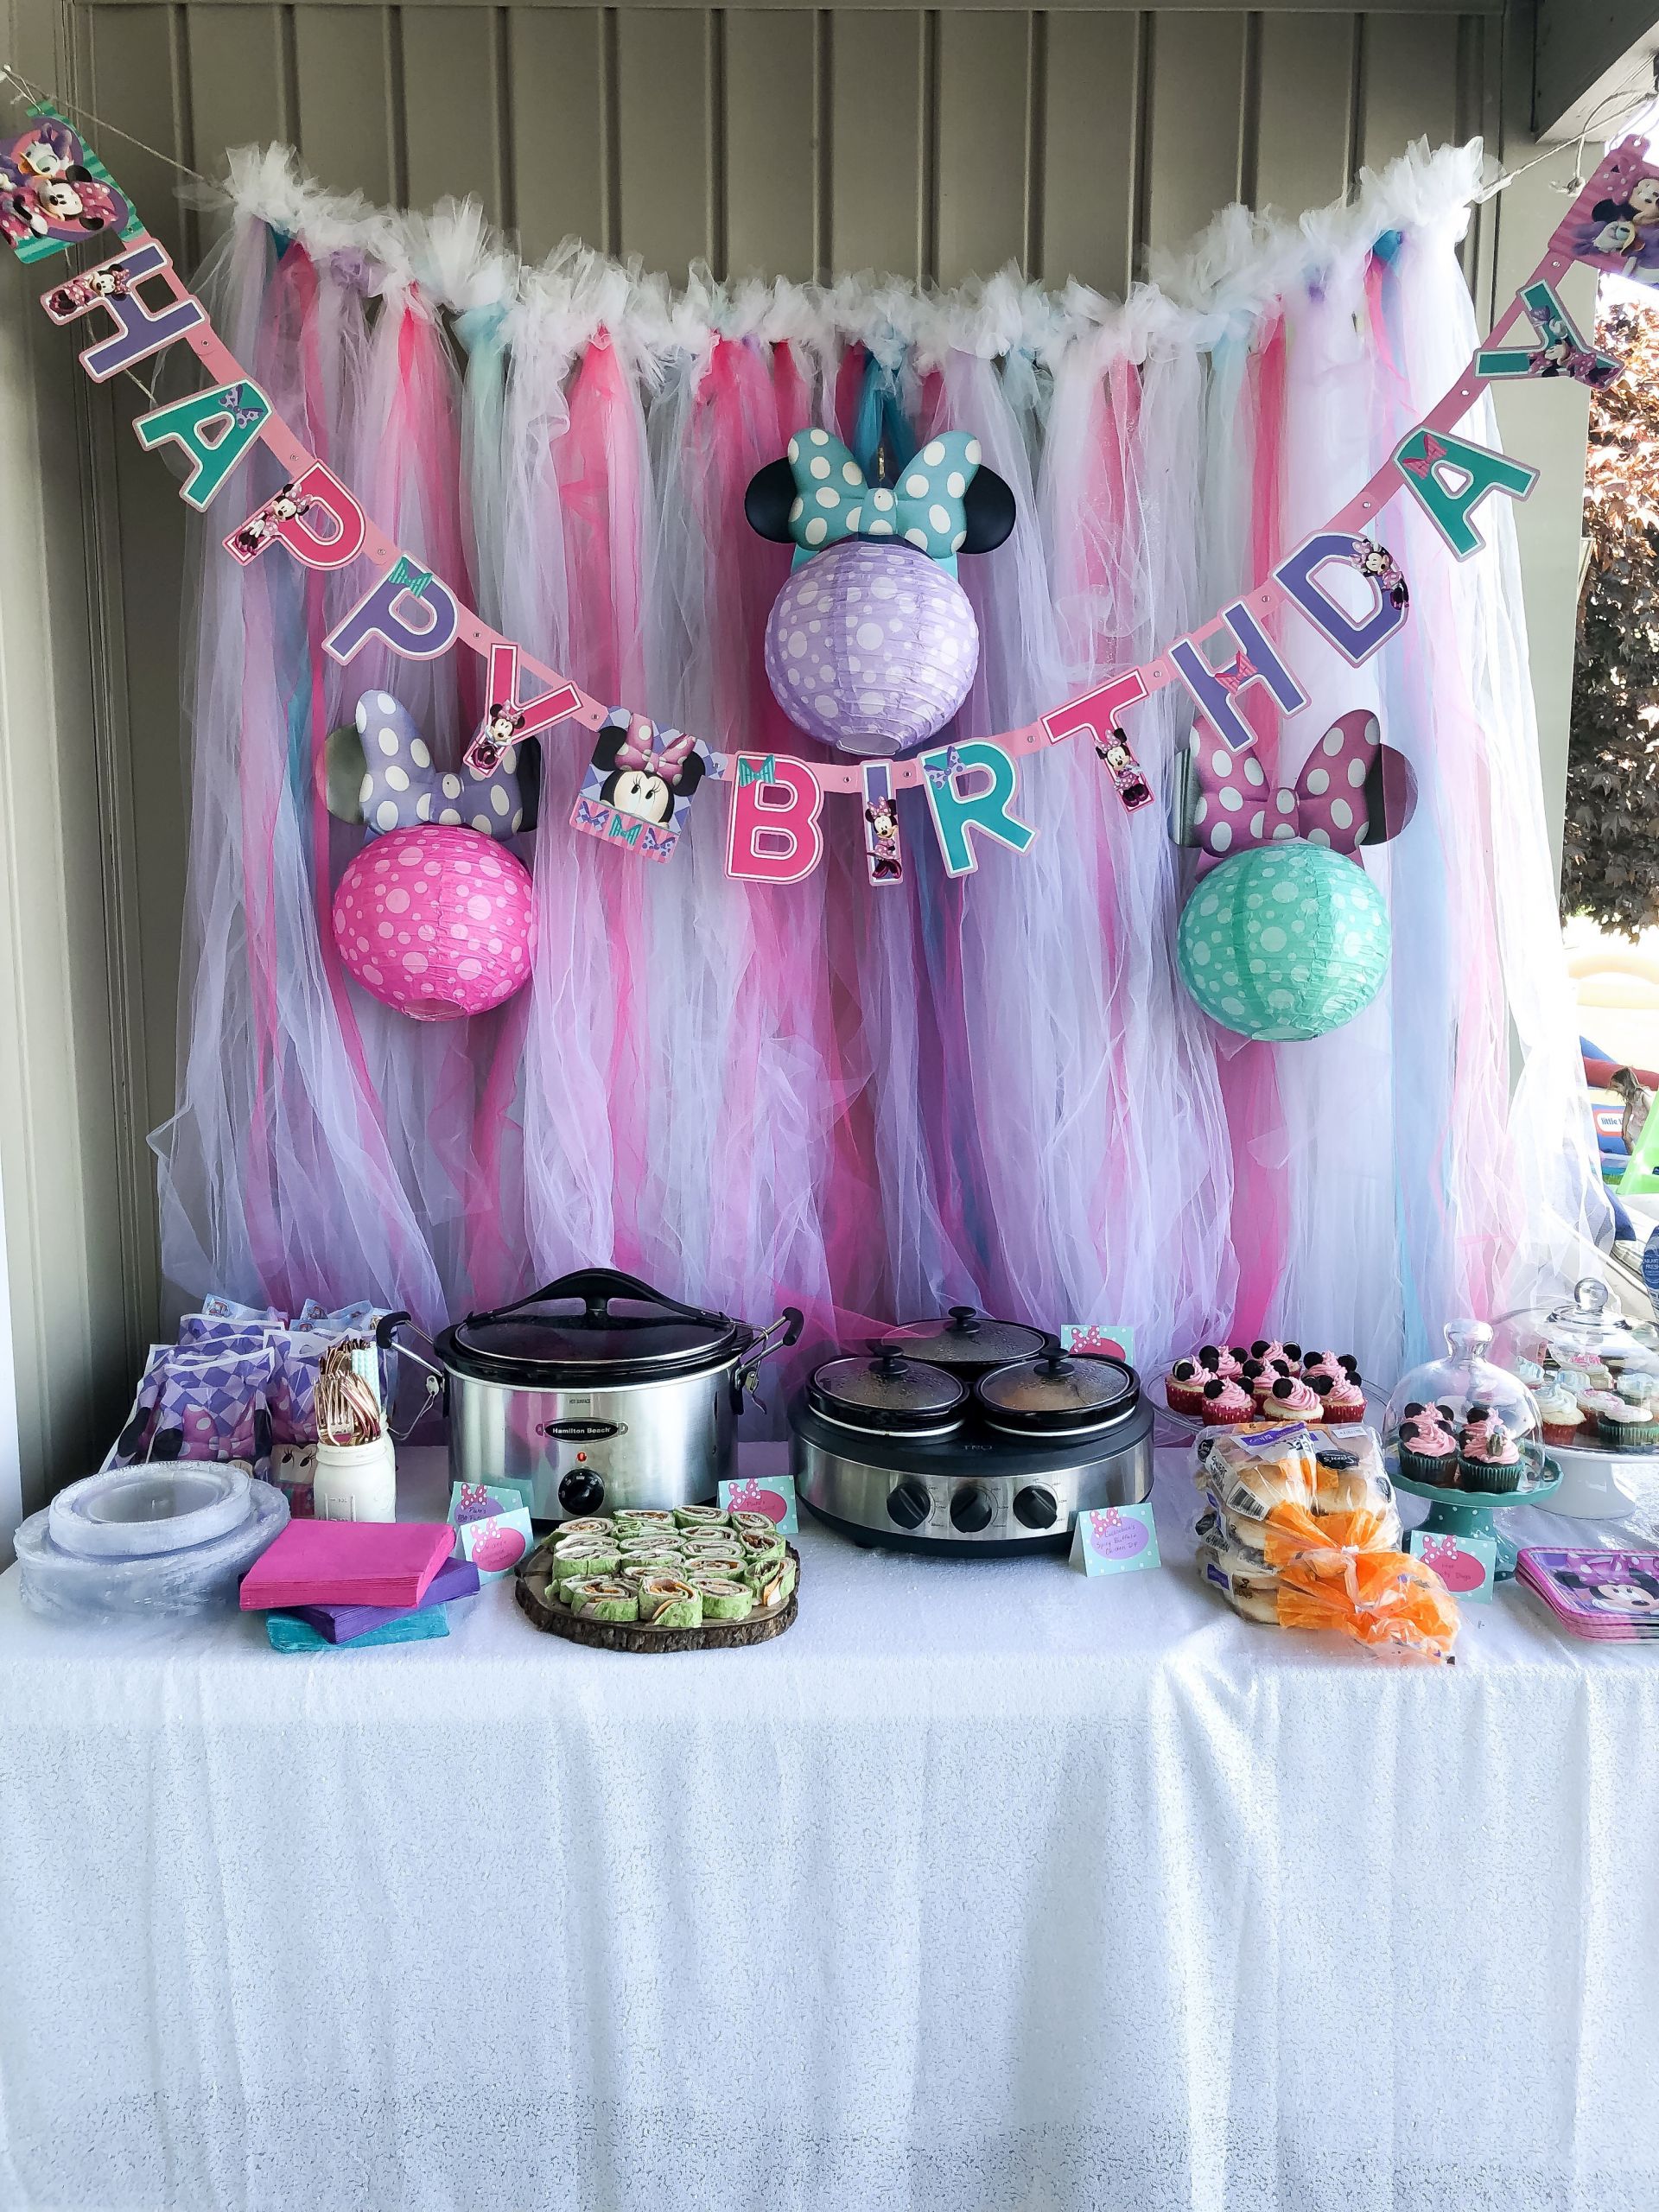 Ideas For A Minnie Mouse Birthday Party
 Minnie Mouse Birthday Party Ideas • 29 Design Studio